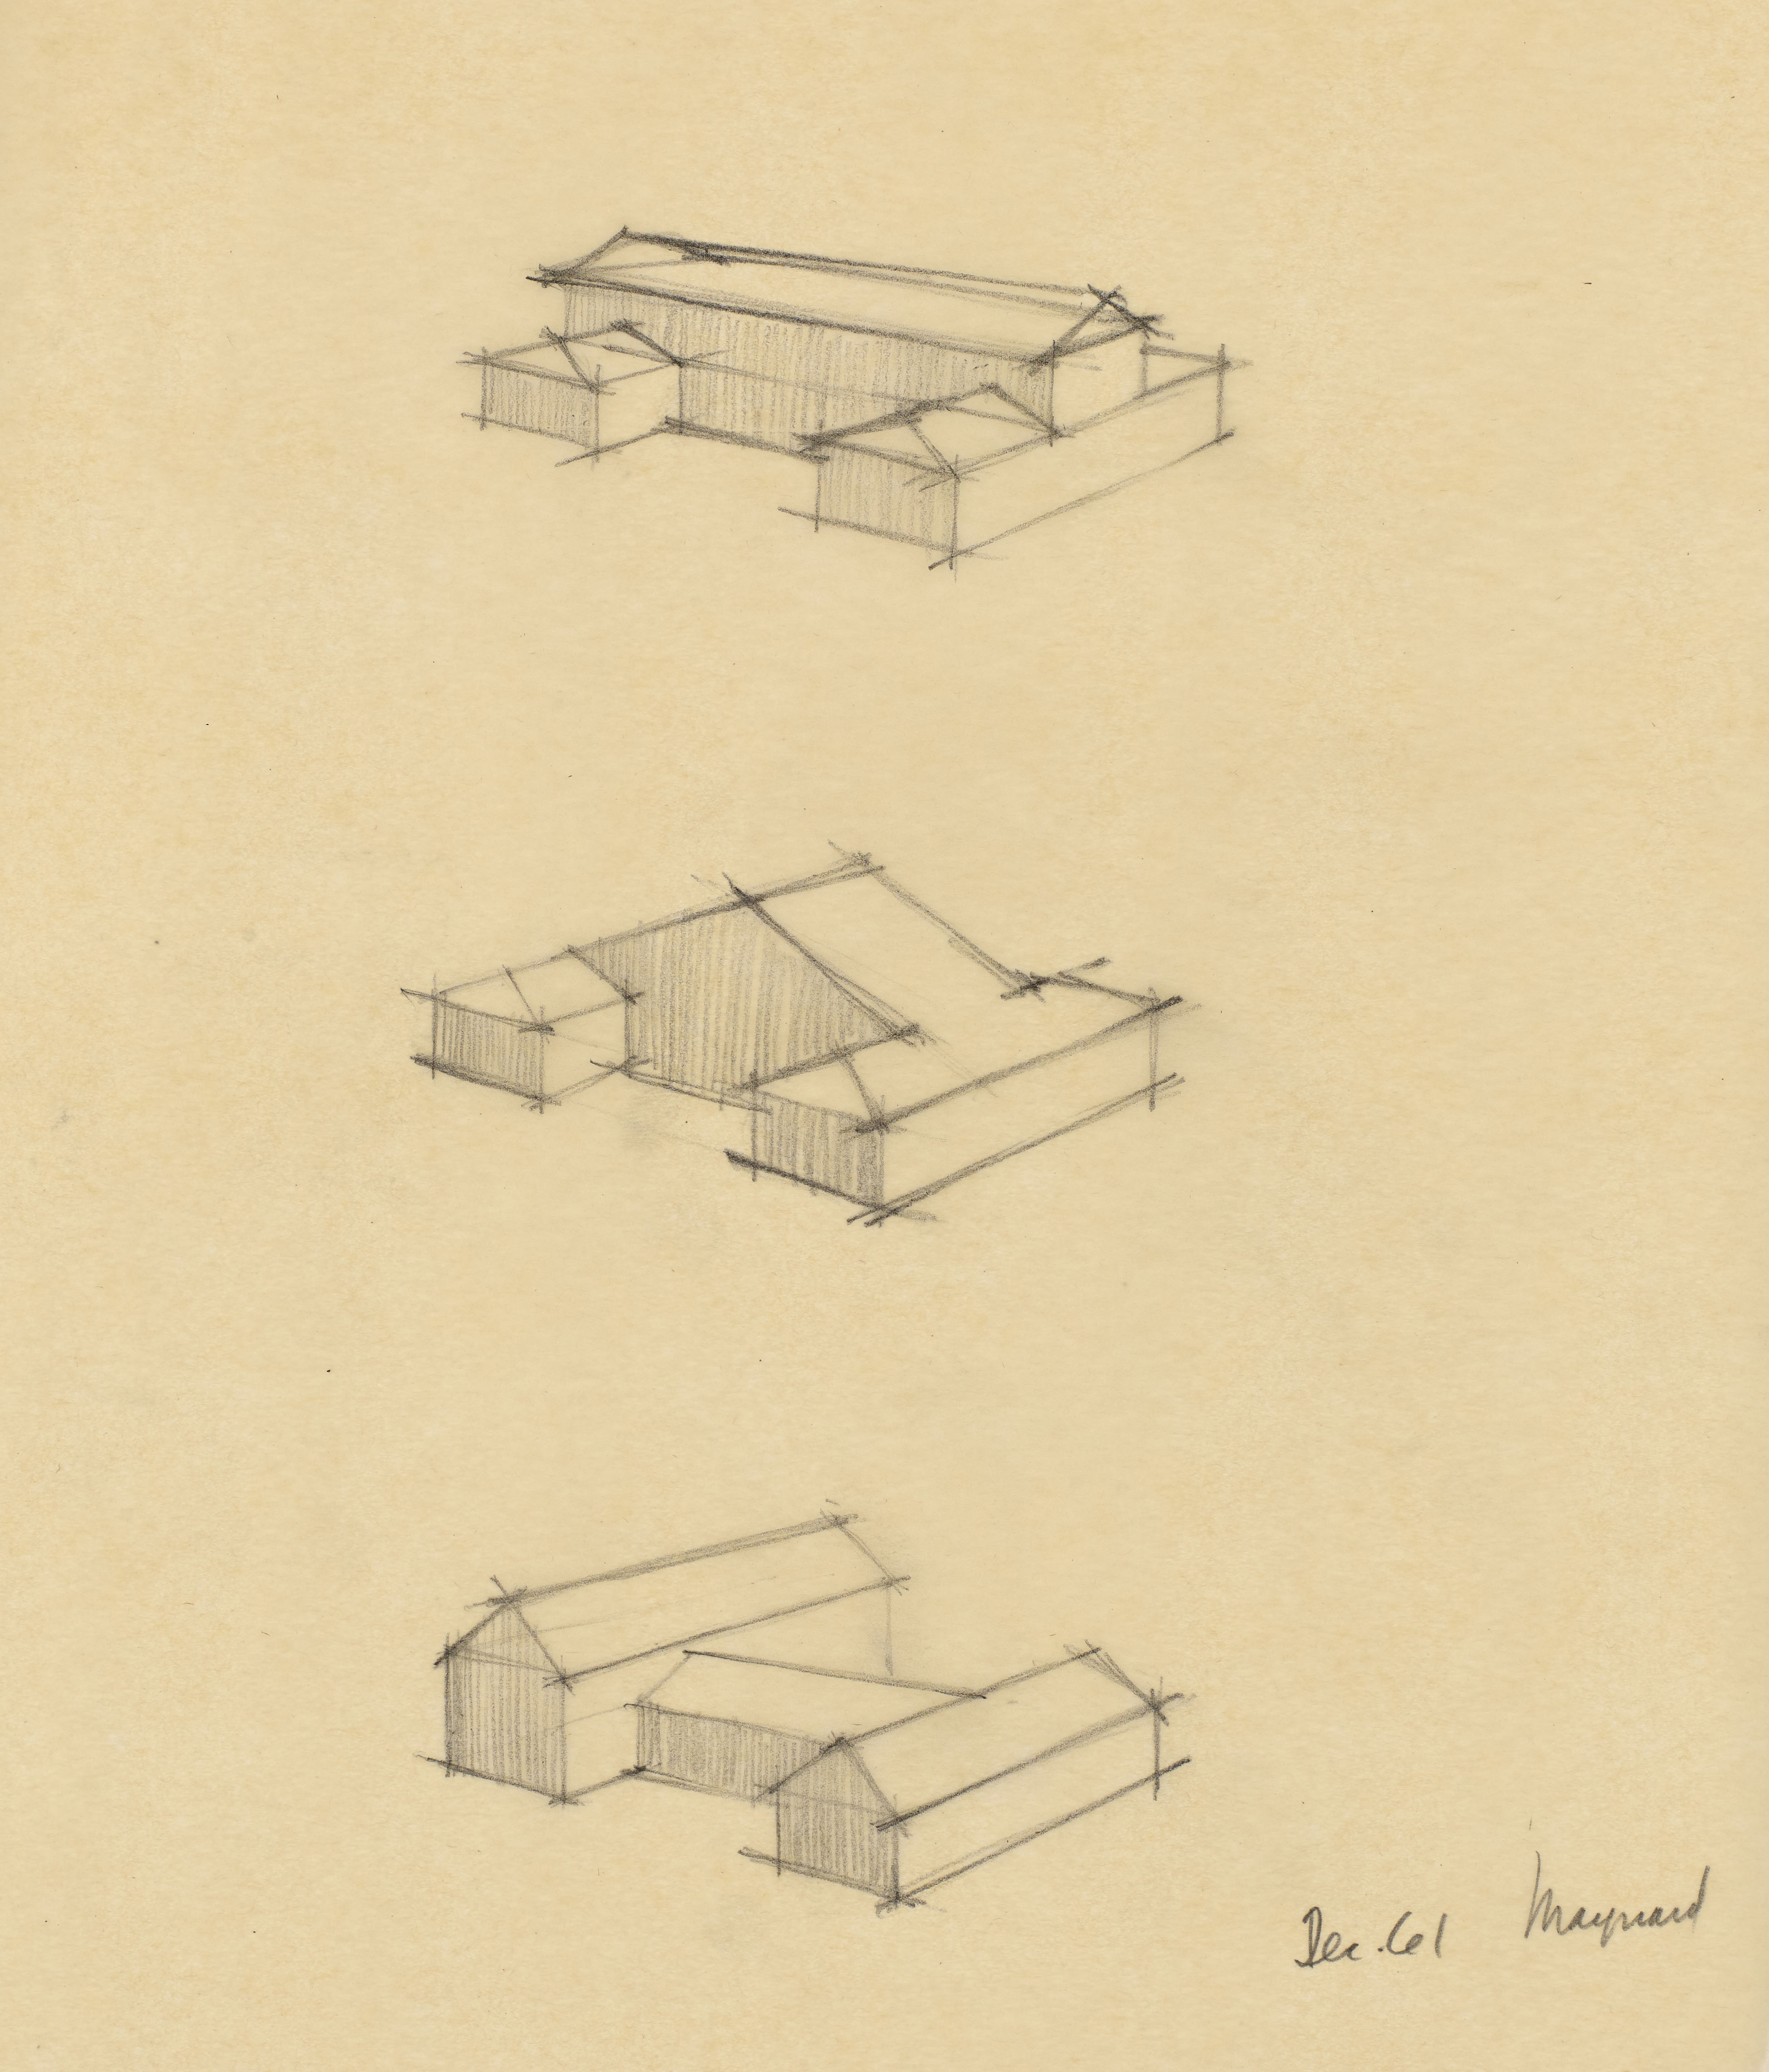 EPM Untitled 3 Perspectives, 1961, graphite on tracing paper, 14 x 14 inches